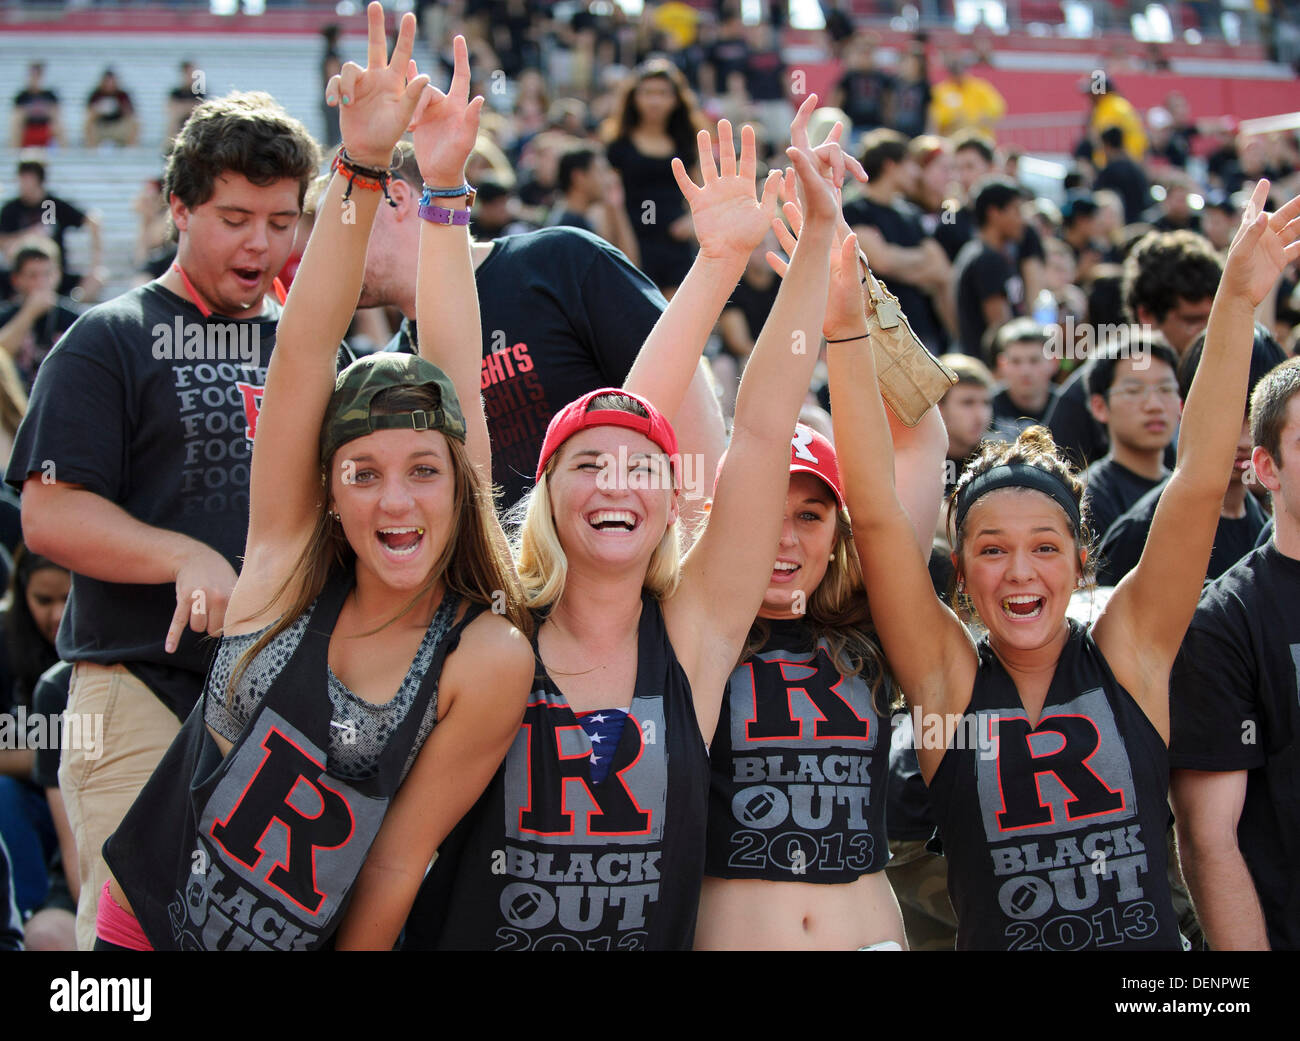 Piscataway, New Jersey, USA. 21st Sep, 2013. September 21, 2013: Attractive RU black out super fans of the Rutgers Scarlet Knights wave and cheer during the game between Arkansas Razorbacks and Rutgers Scarlet Knights at Highpoint Solutions Stadium in Piscataway, NJ. Rutgers Scarlet Knights defeated The Arkansas Razorbacks 28-24. © csm/Alamy Live News Stock Photo